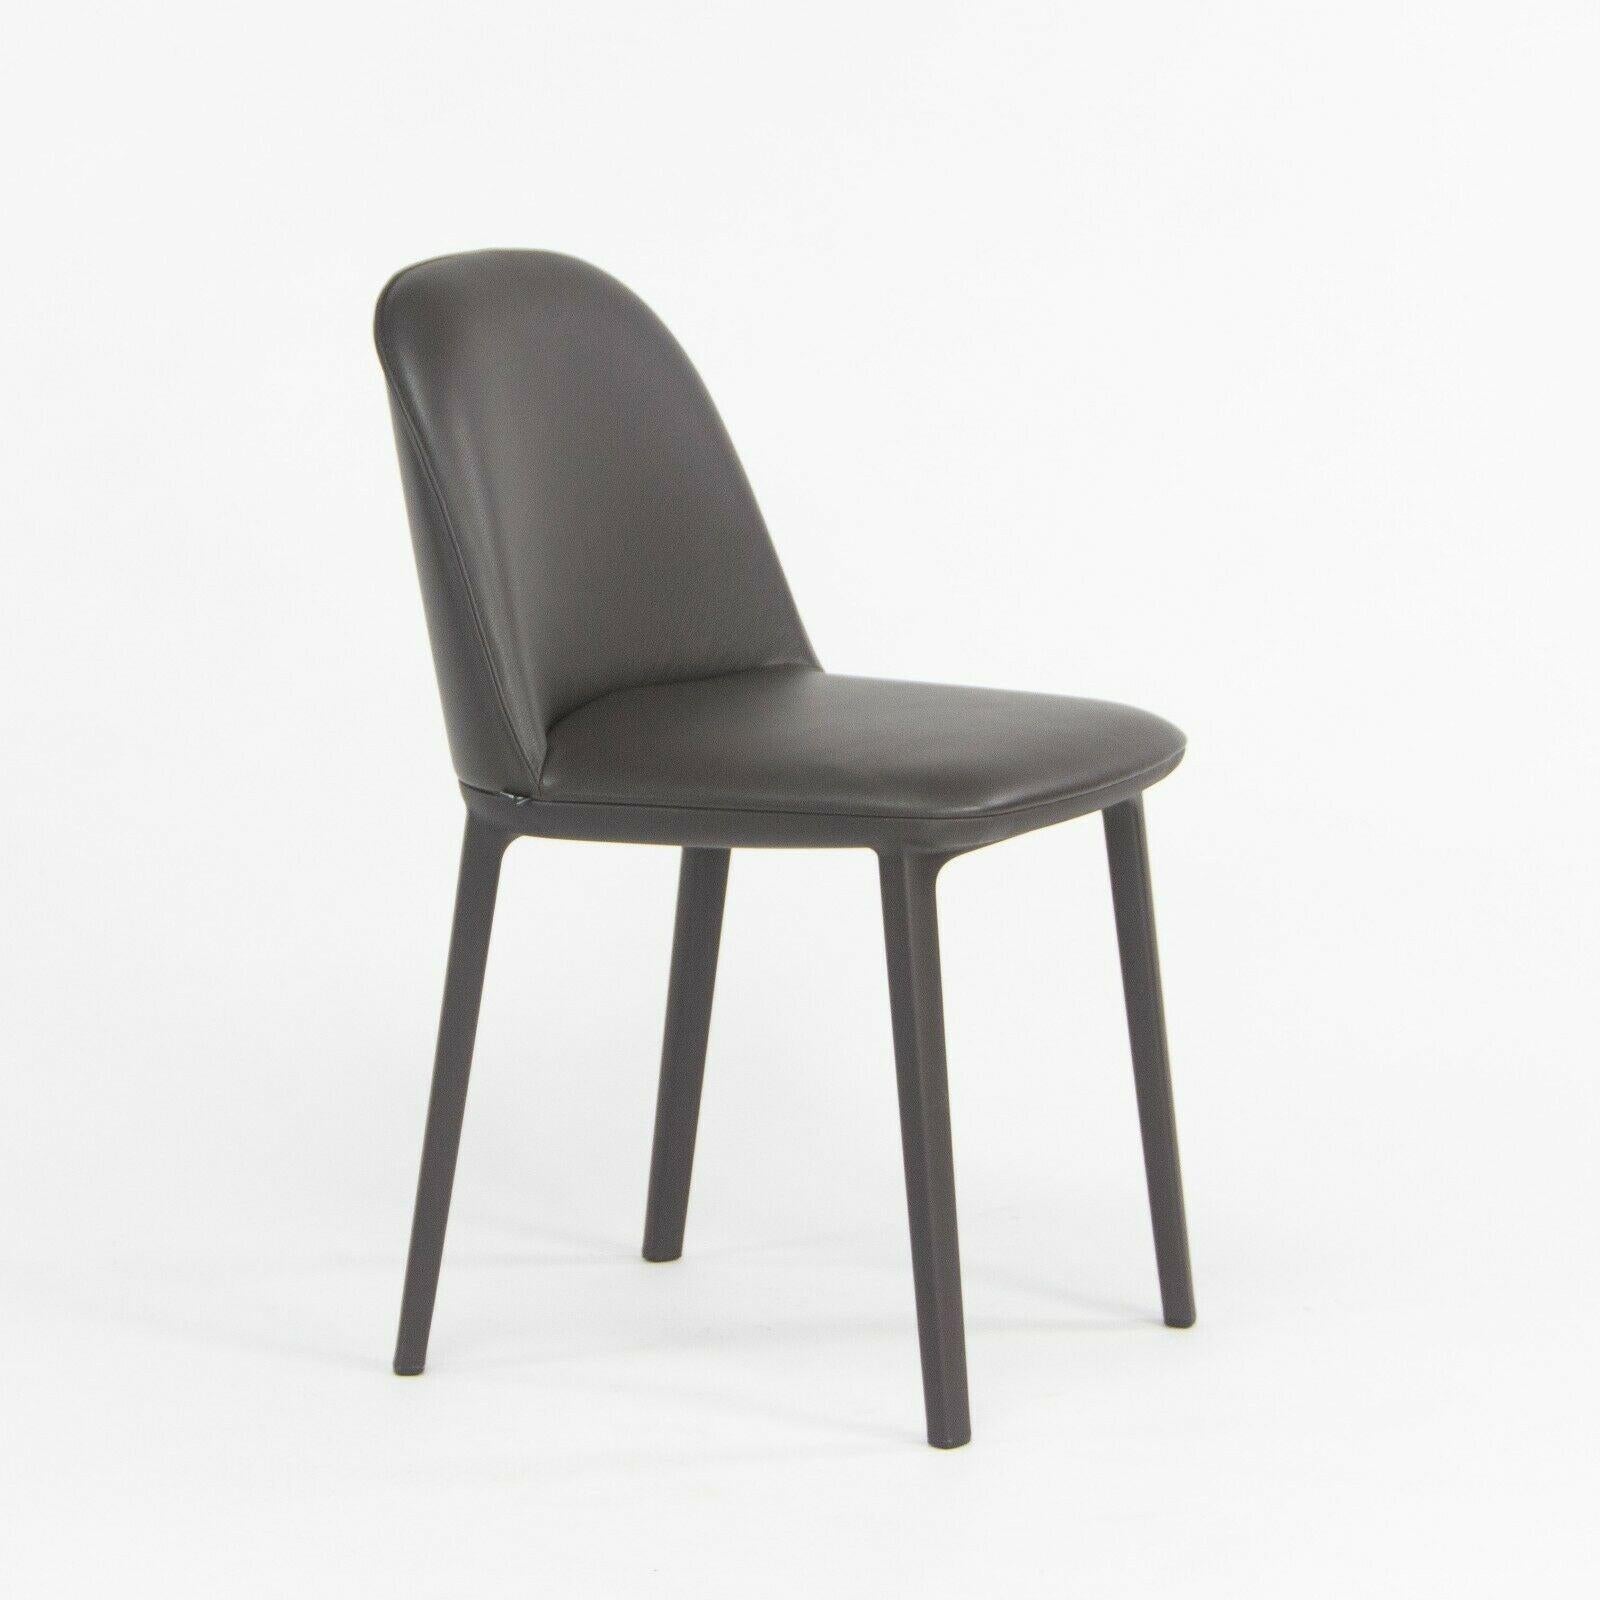 Listed for sale is Softshell Side Chair designed by Ronan and Erwan Bouroullec and produced by Vitra. This chair was constructed with a chocolate colored (very dark) plastic base and seat upholstered with full grain dark brown leather. The condition